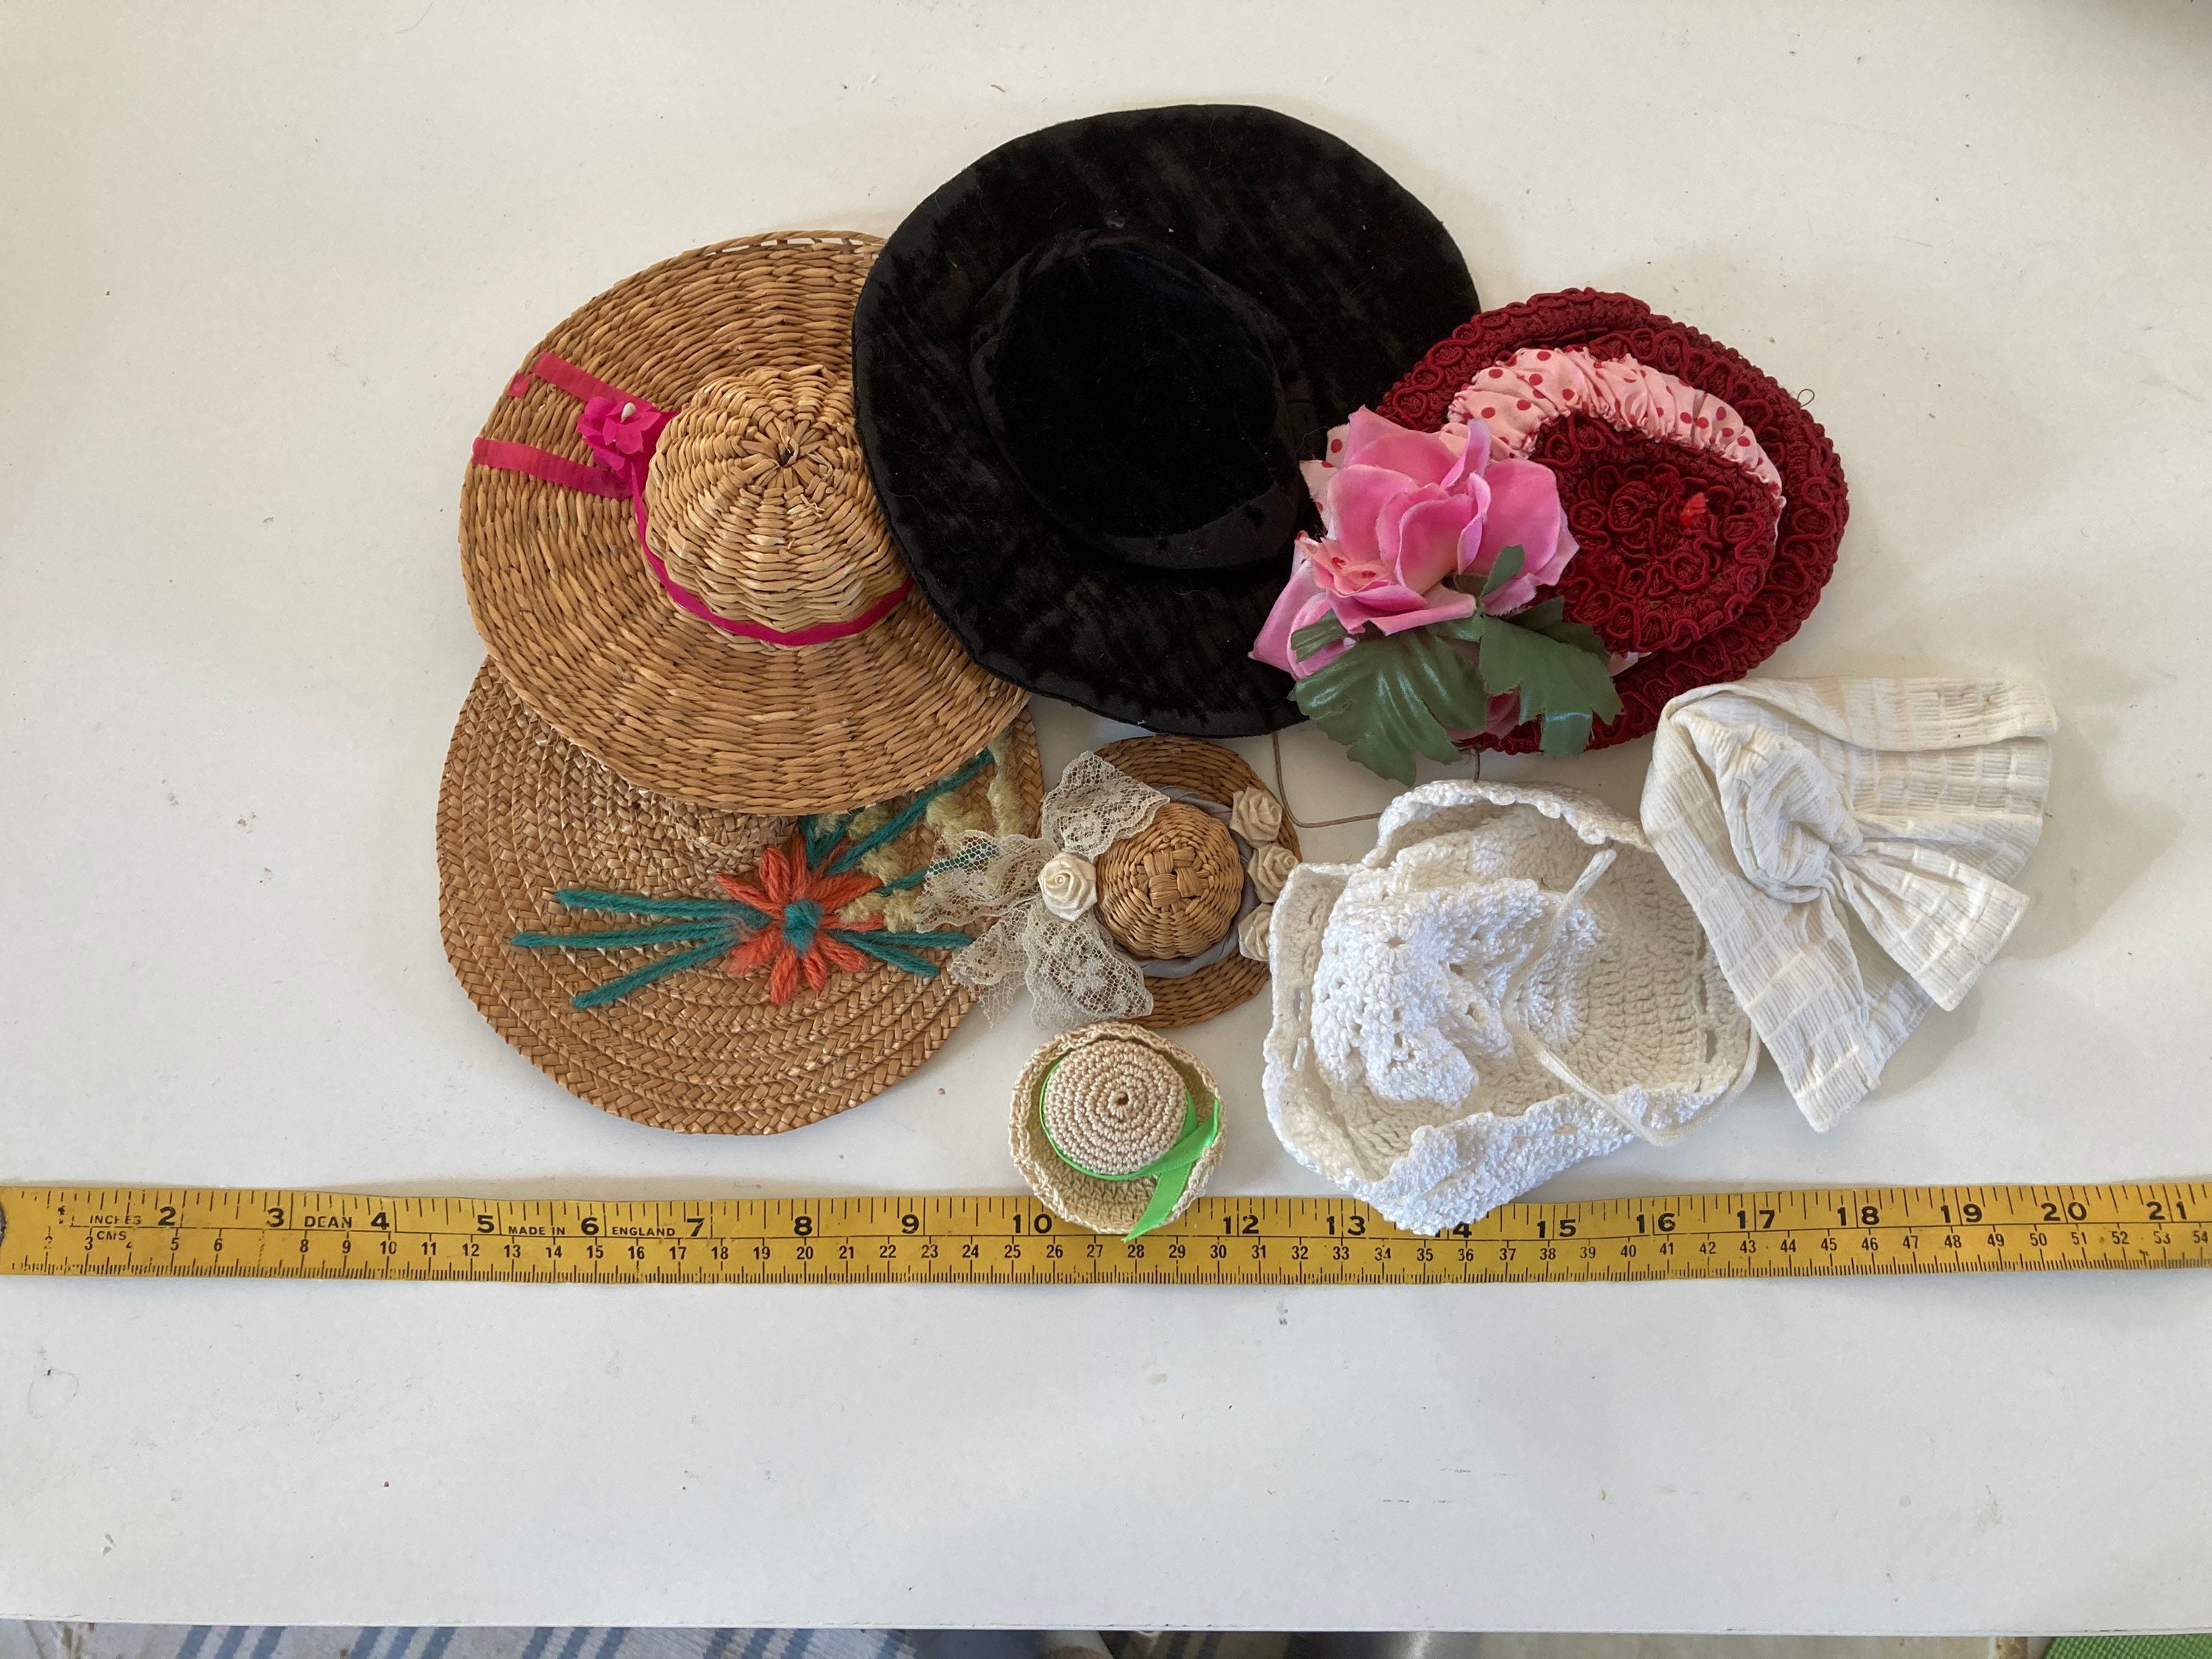 Lot of 8 vintage hats for dolls. From Victorian to 1950s. From